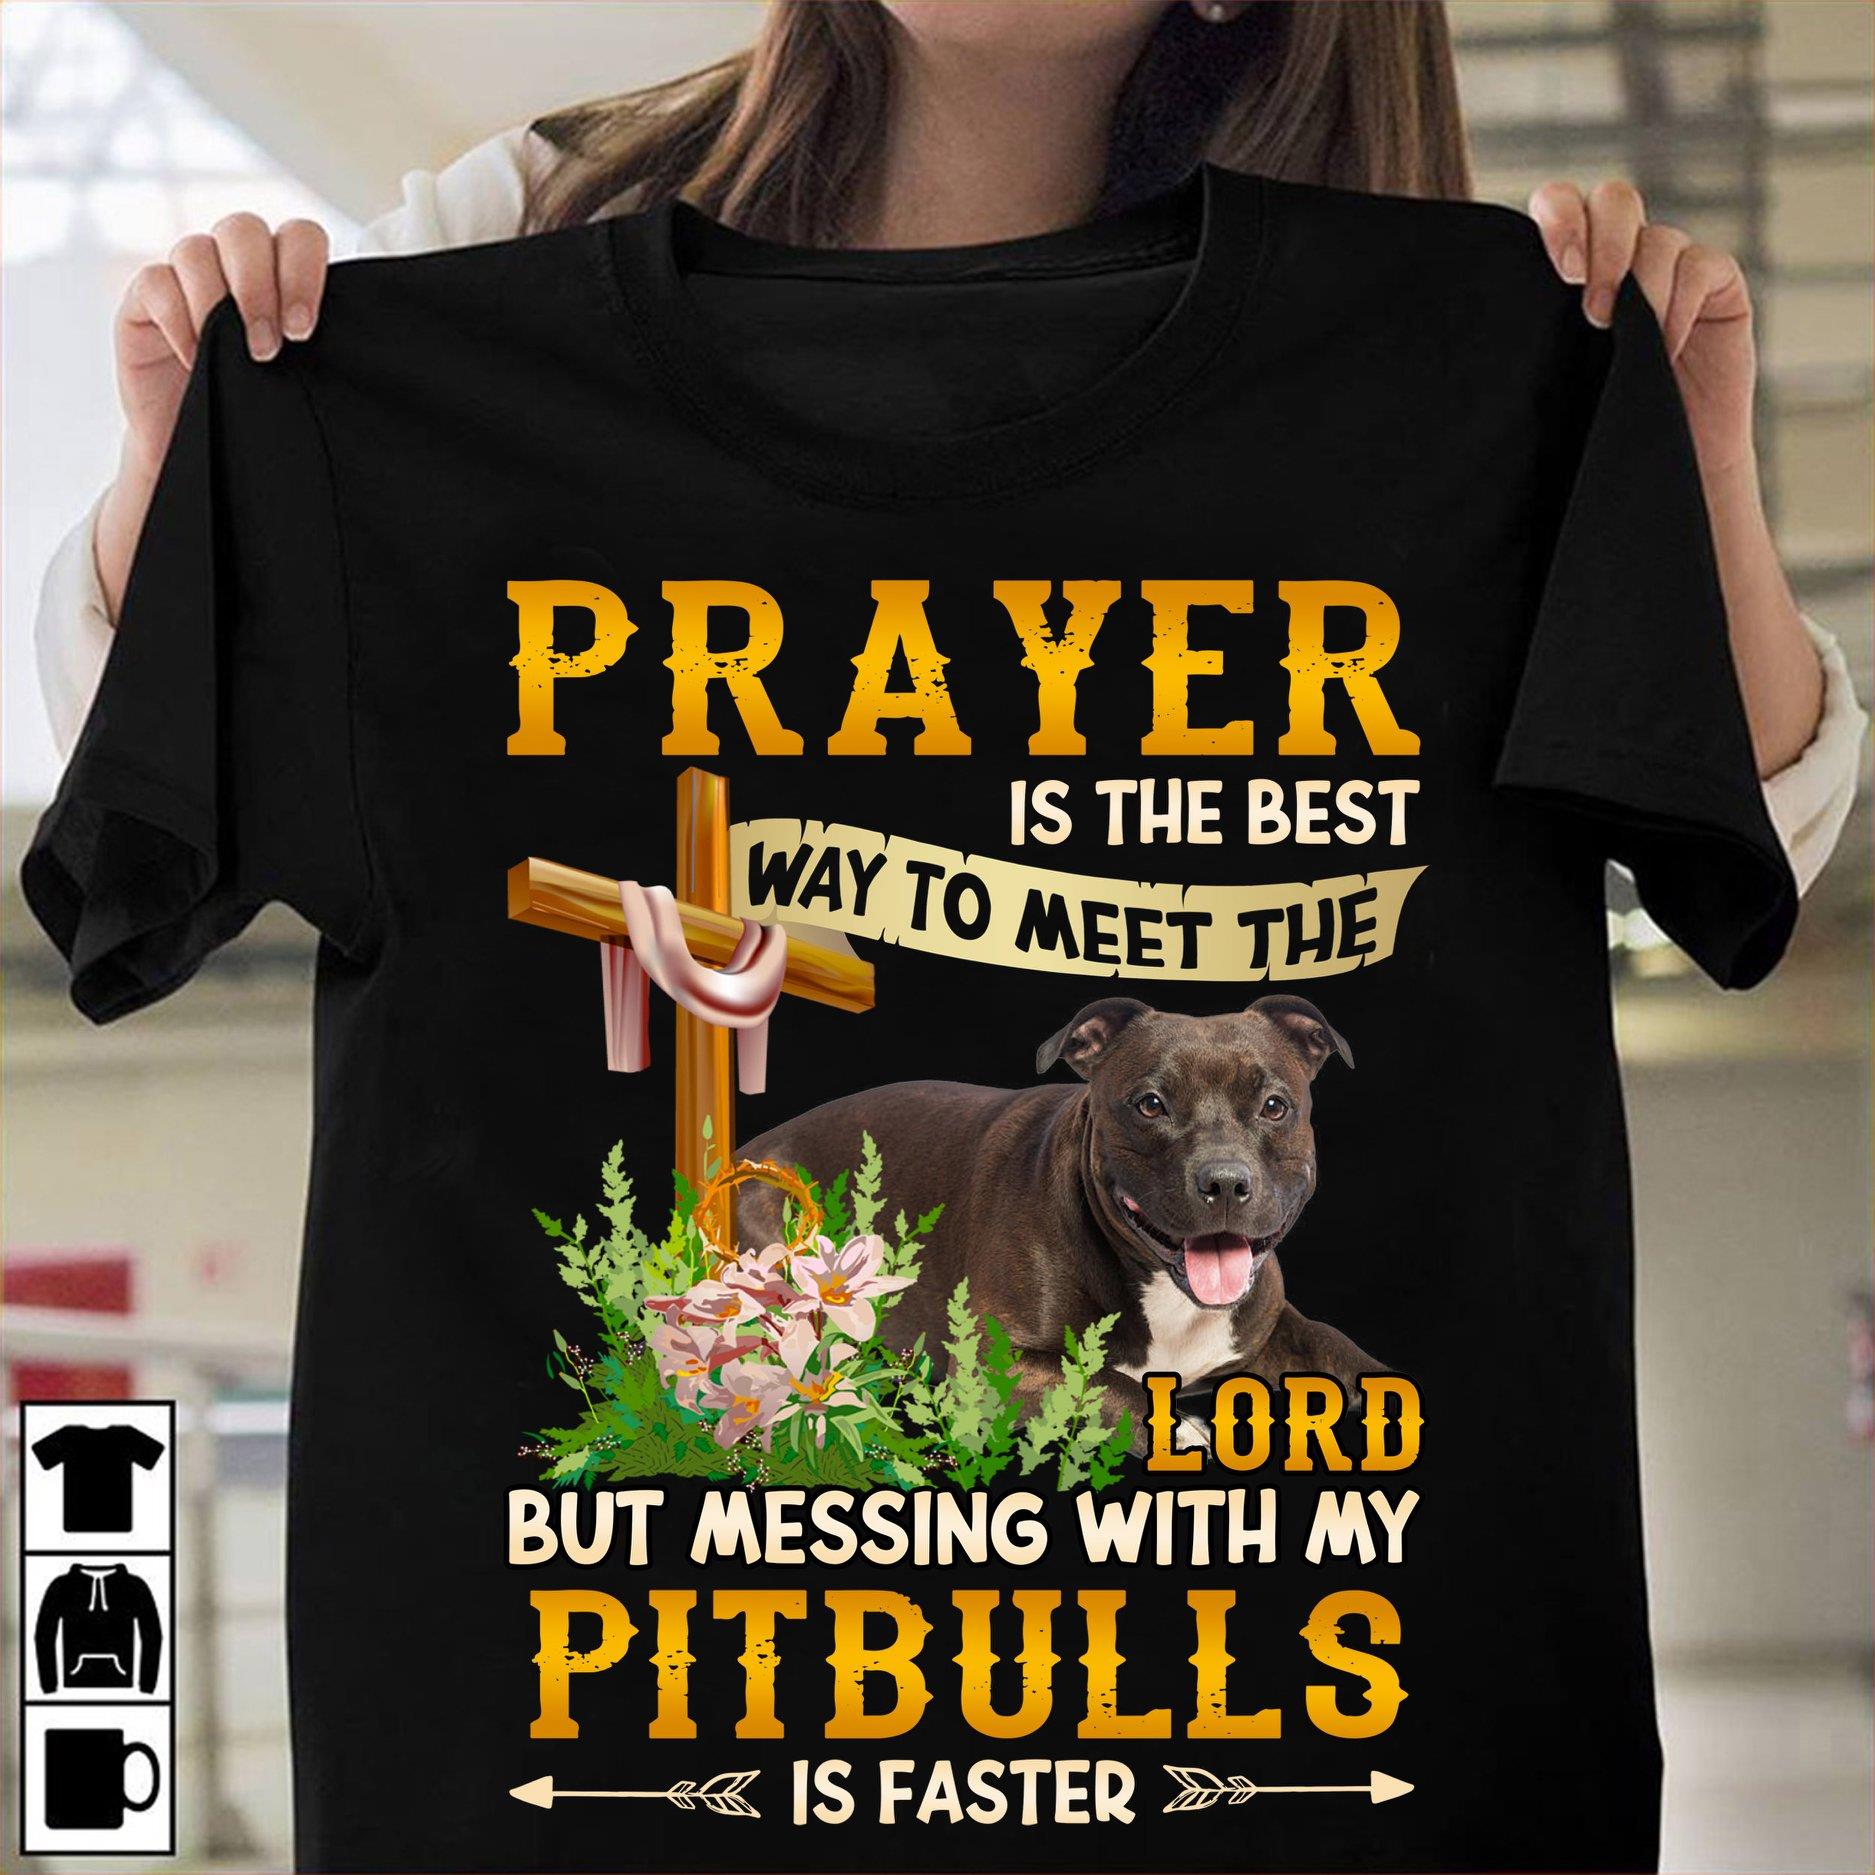 Prayer is the best way to meet the Lord but messing with my pitbulls is faster